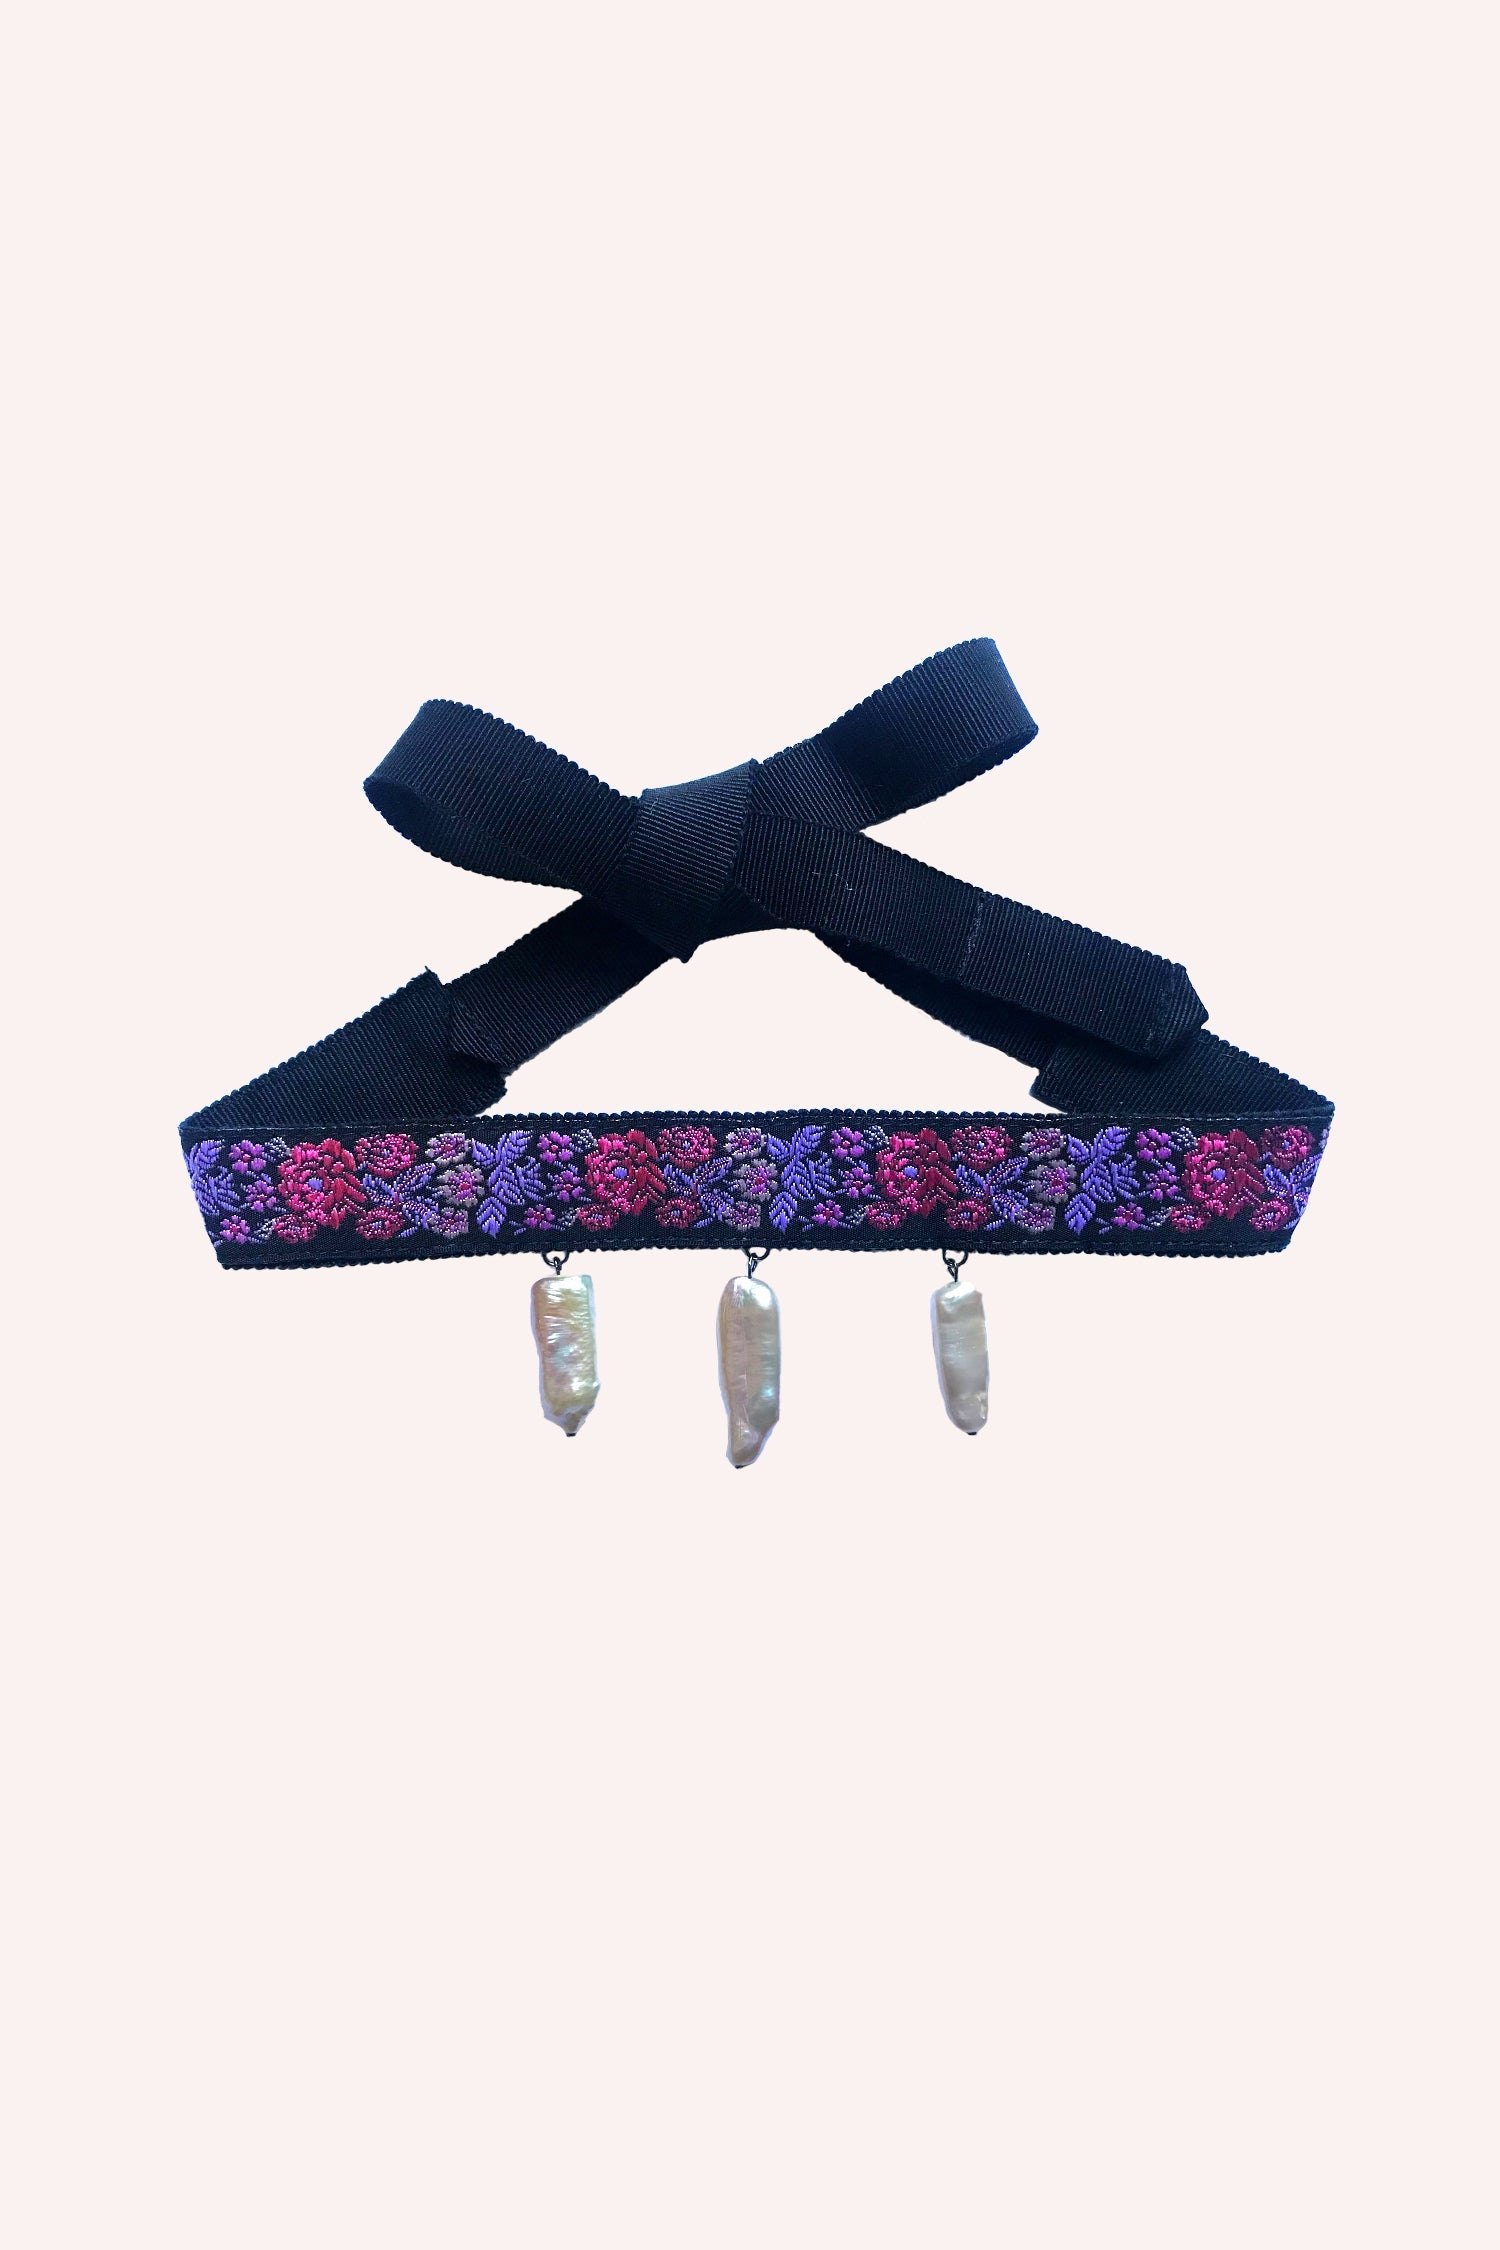 Choker With Freshwater Pearls in lavander features a floral design with hues of blue and three Lavender stones